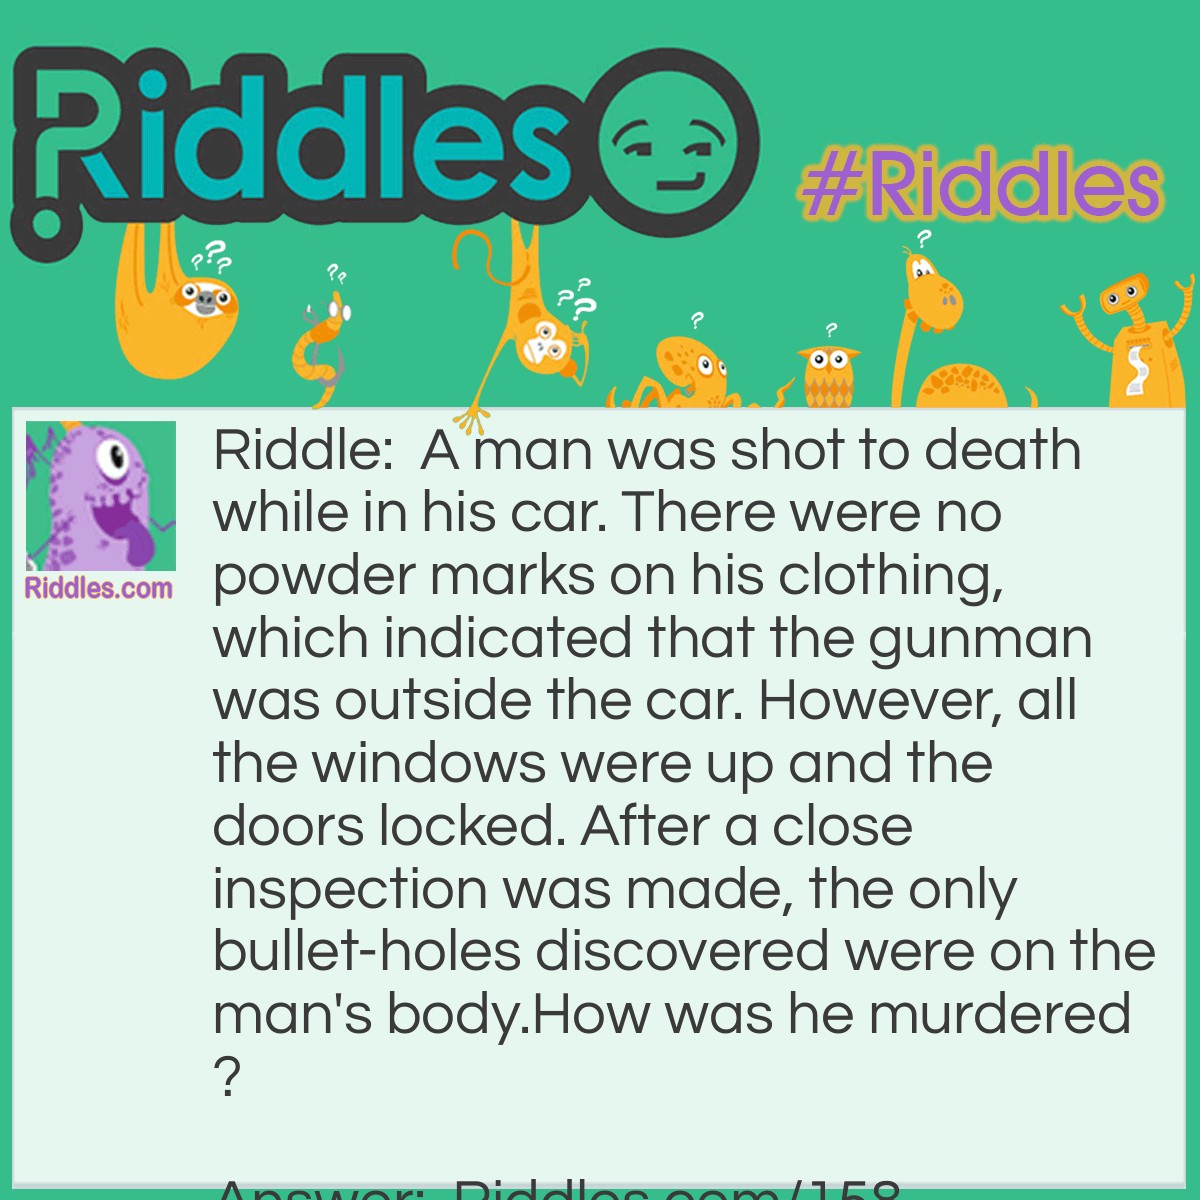 Riddle: A man was shot to death while in his car. There were no powder marks on his clothing, which indicated that the gunman was outside the car. However, all the windows were up and the doors locked. After a close inspection was made, the only bullet-holes discovered were on the man's body. How was he murdered? Answer: The victim was in a convertible. He was shot when the top was down.